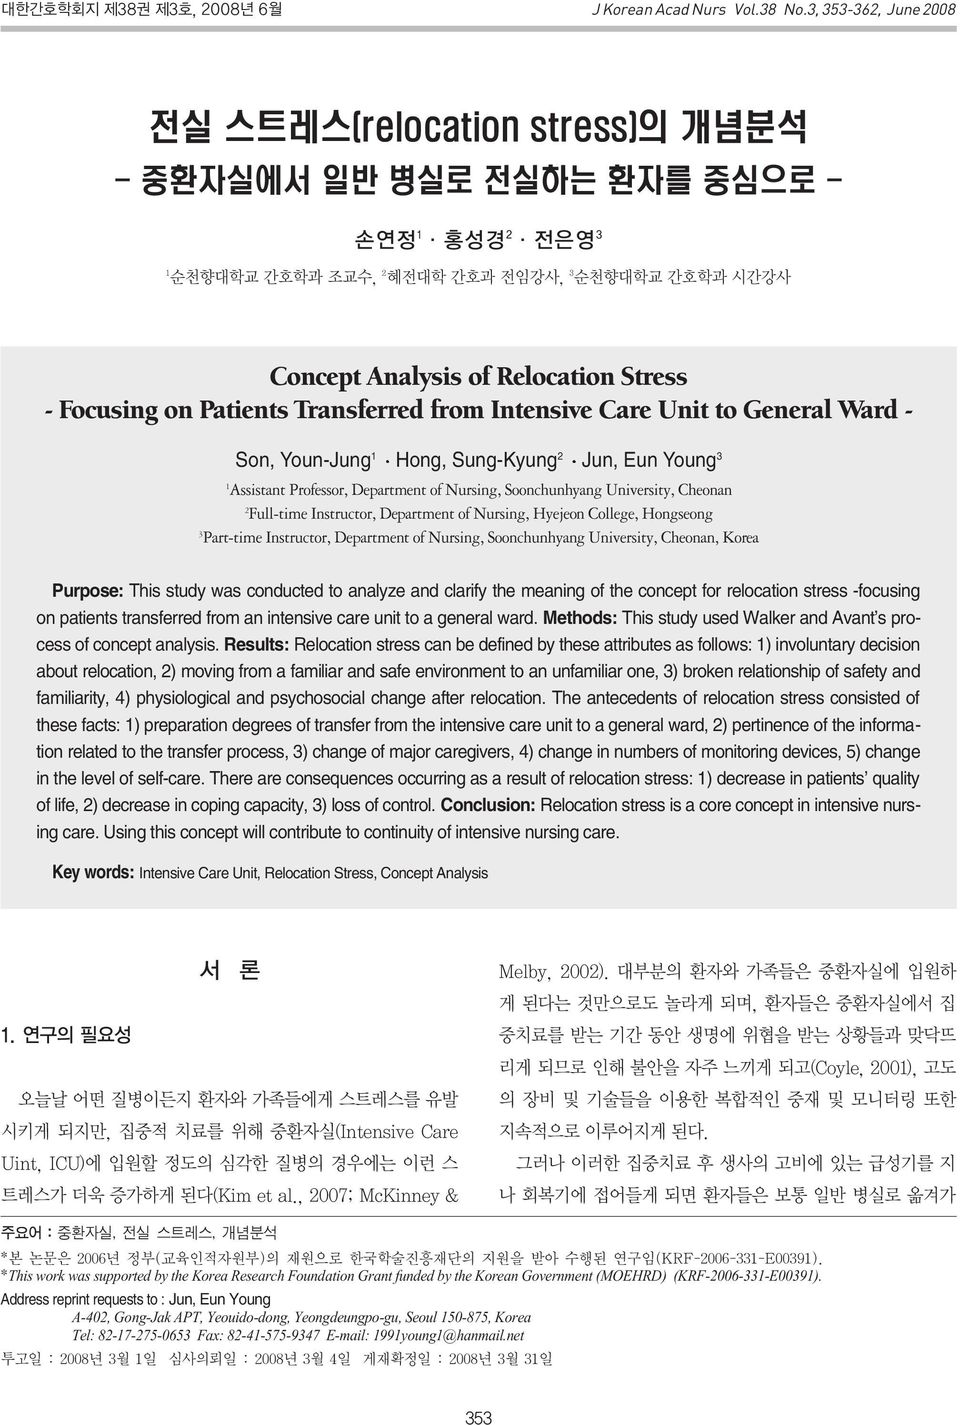 Focusing on Patients Transferred from Intensive Care Unit to General Ward - Son, Youn-Jung 1 Hong, Sung-Kyung 2 Jun, Eun Young 3 1 Assistant Professor, Department of Nursing, Soonchunhyang